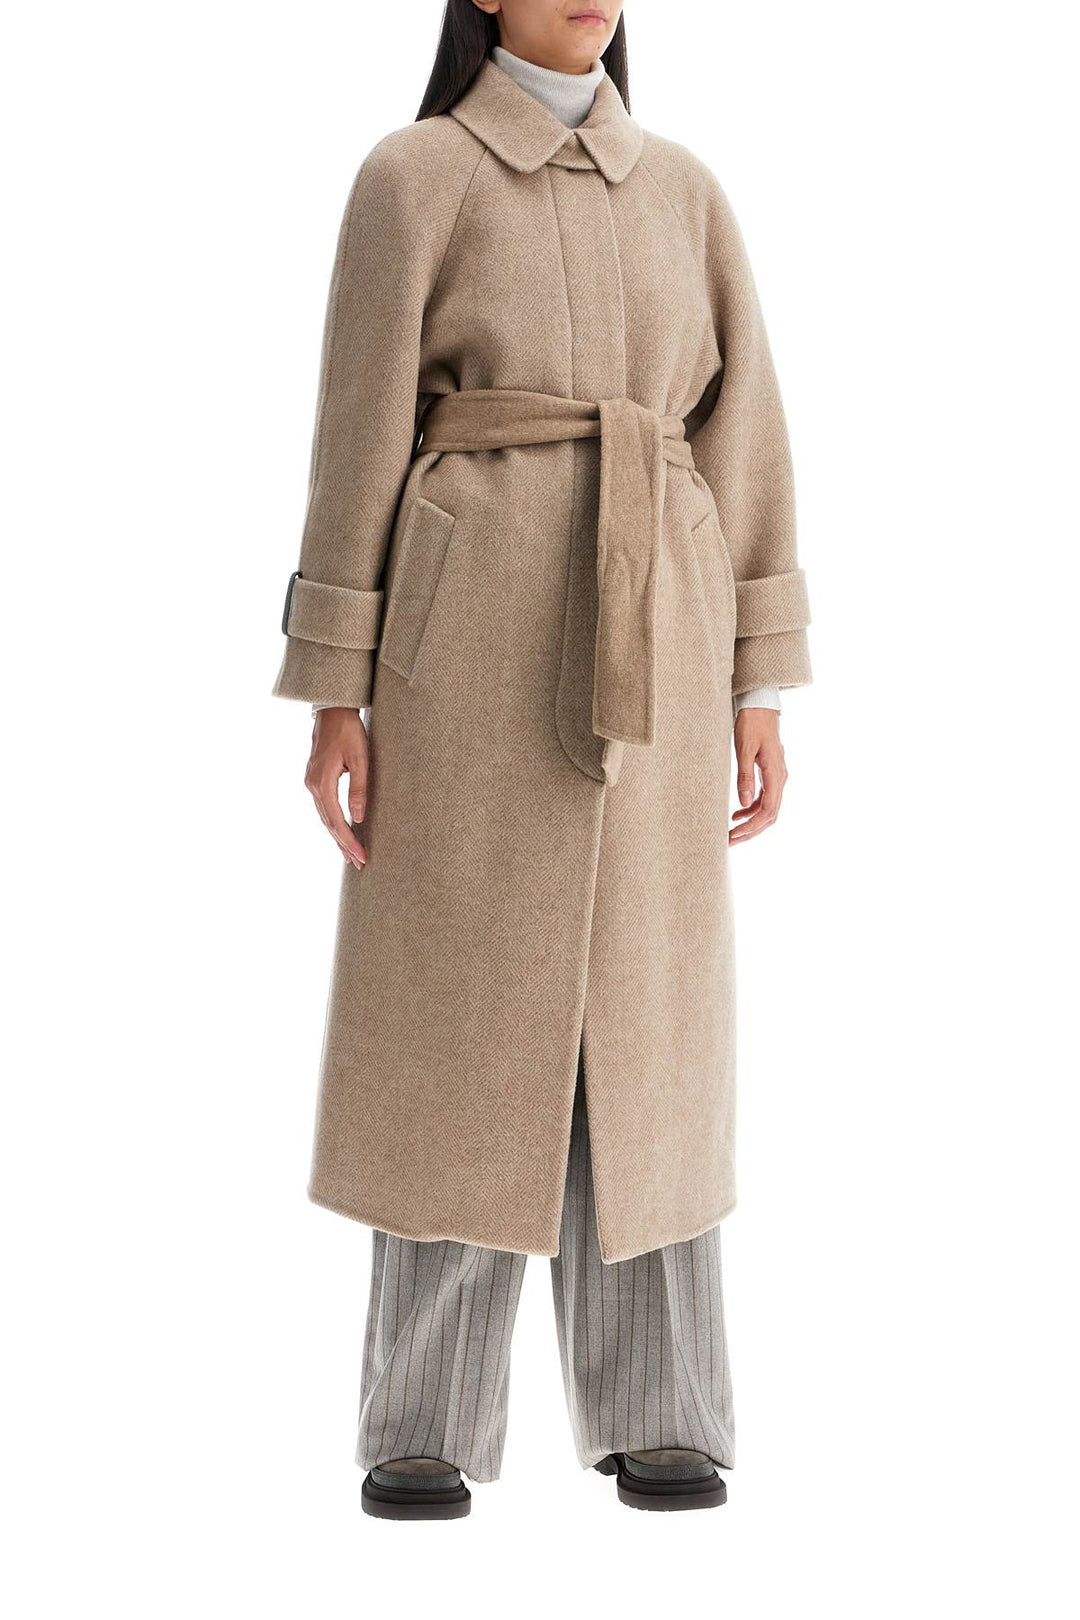 Brunello Cucinelli Wool And Cashmere Coat With Belt.   Beige